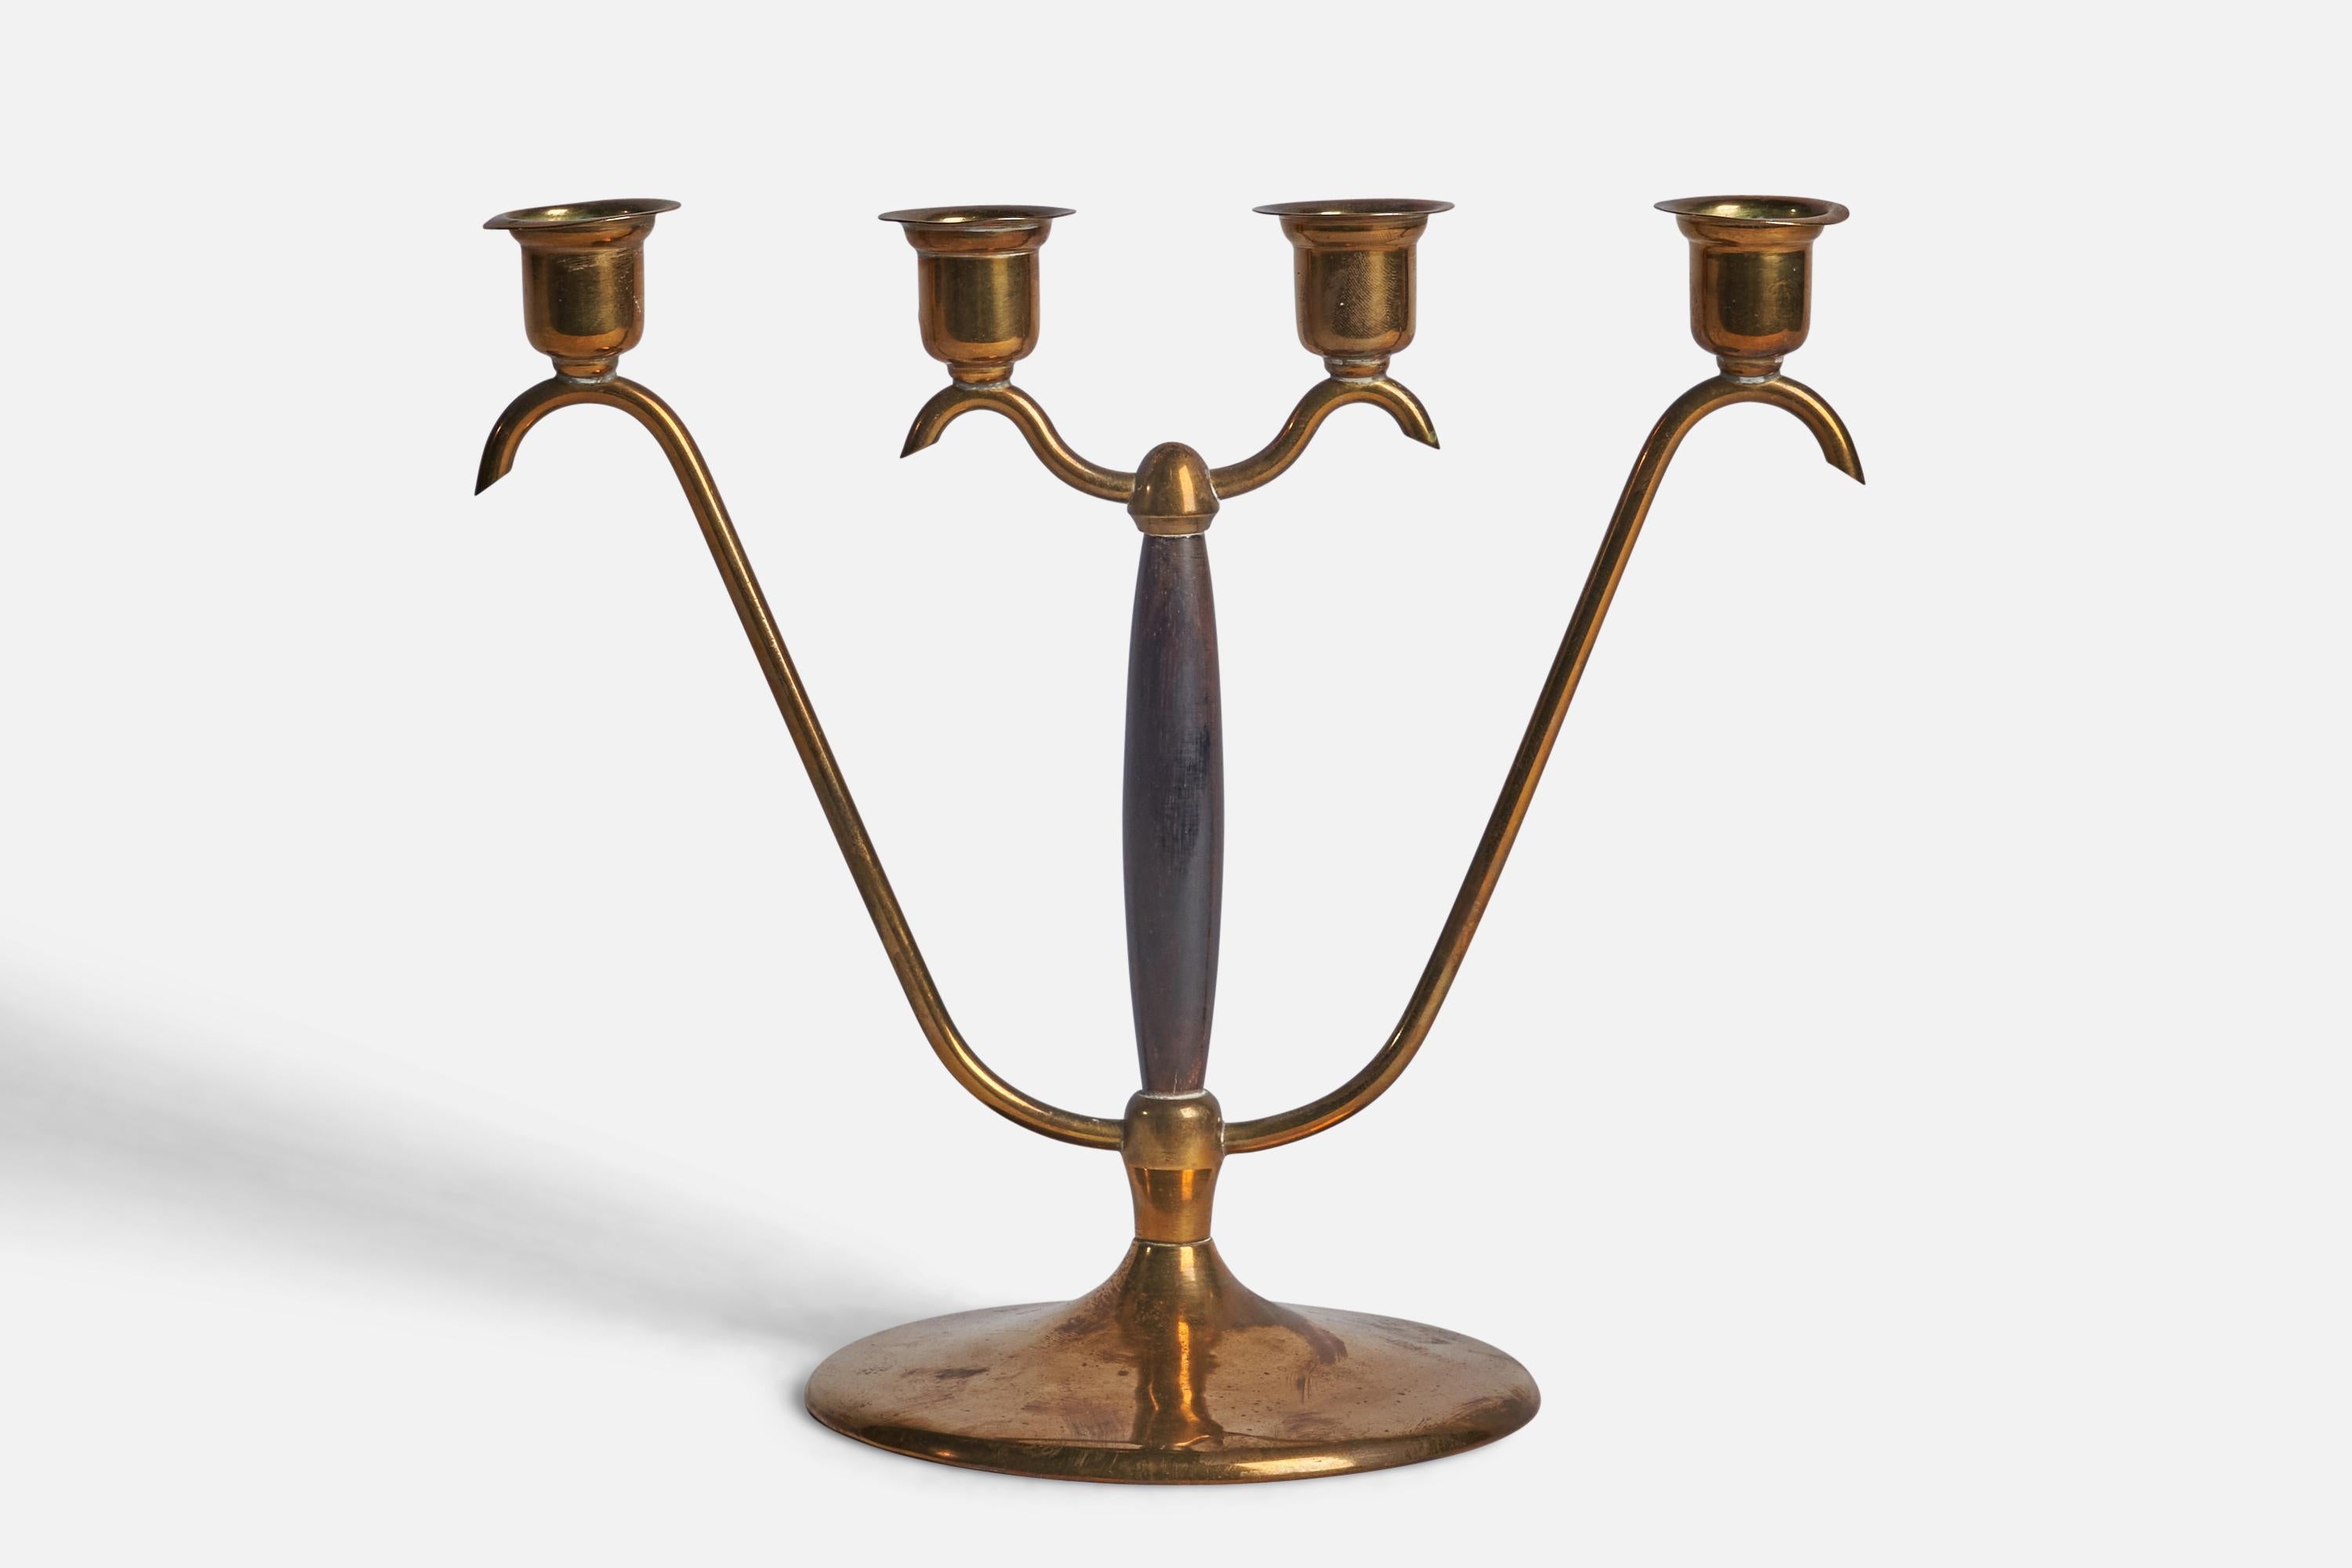 A brass and black-lacquered wood candelabra designed and produced in Sweden, 1940s.

Holds 0.8” candles